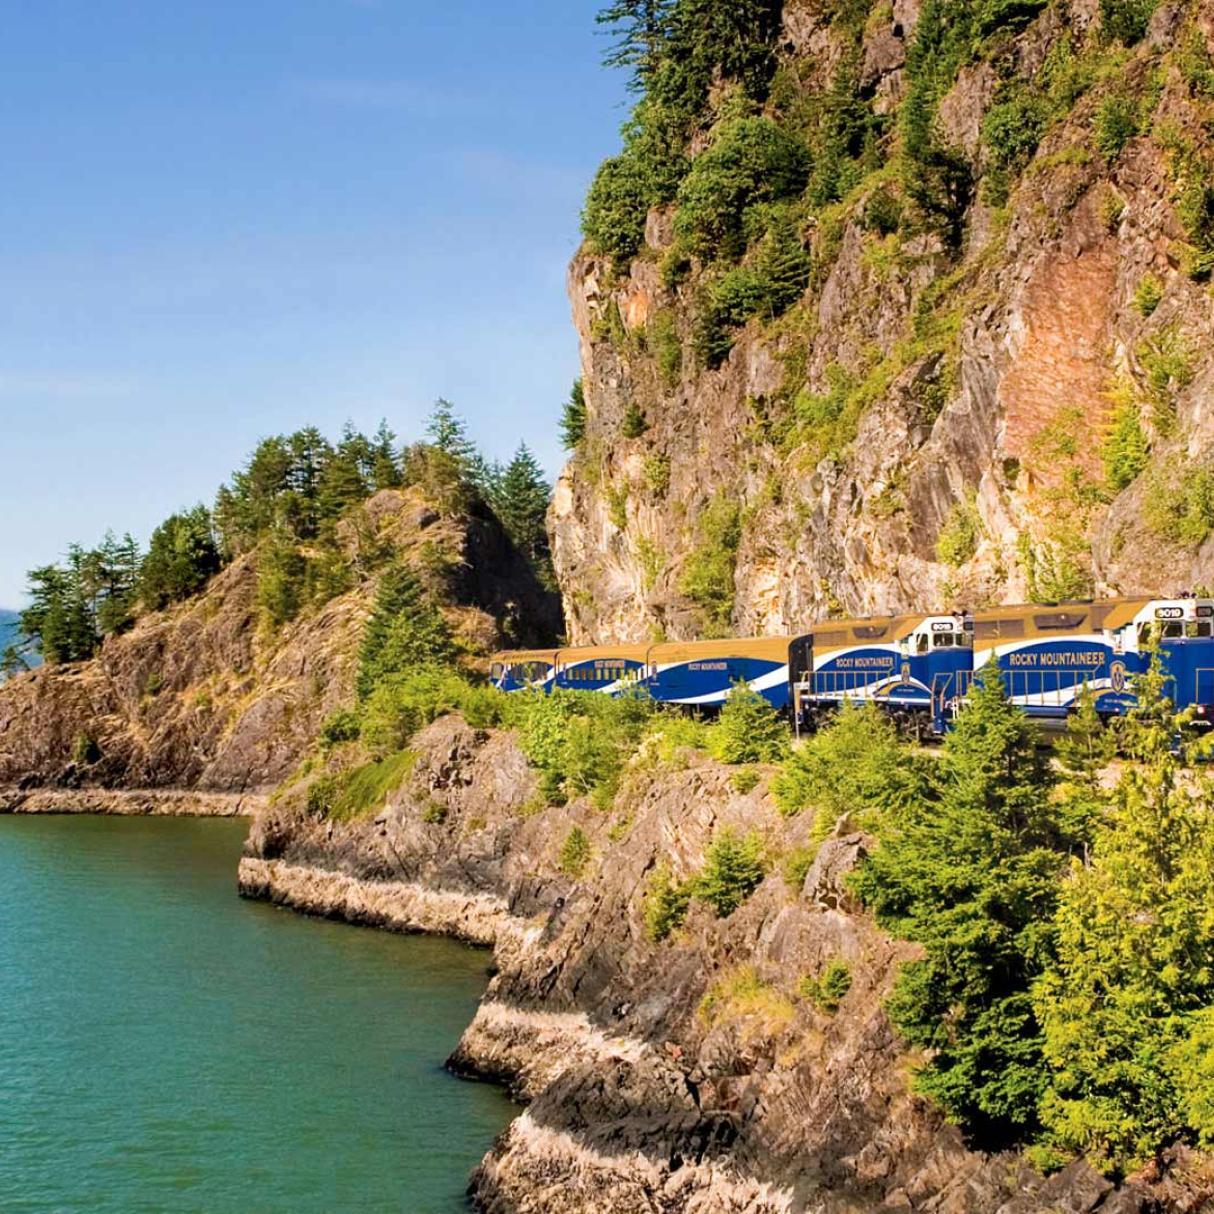 Rocky Mountaineer train by the water